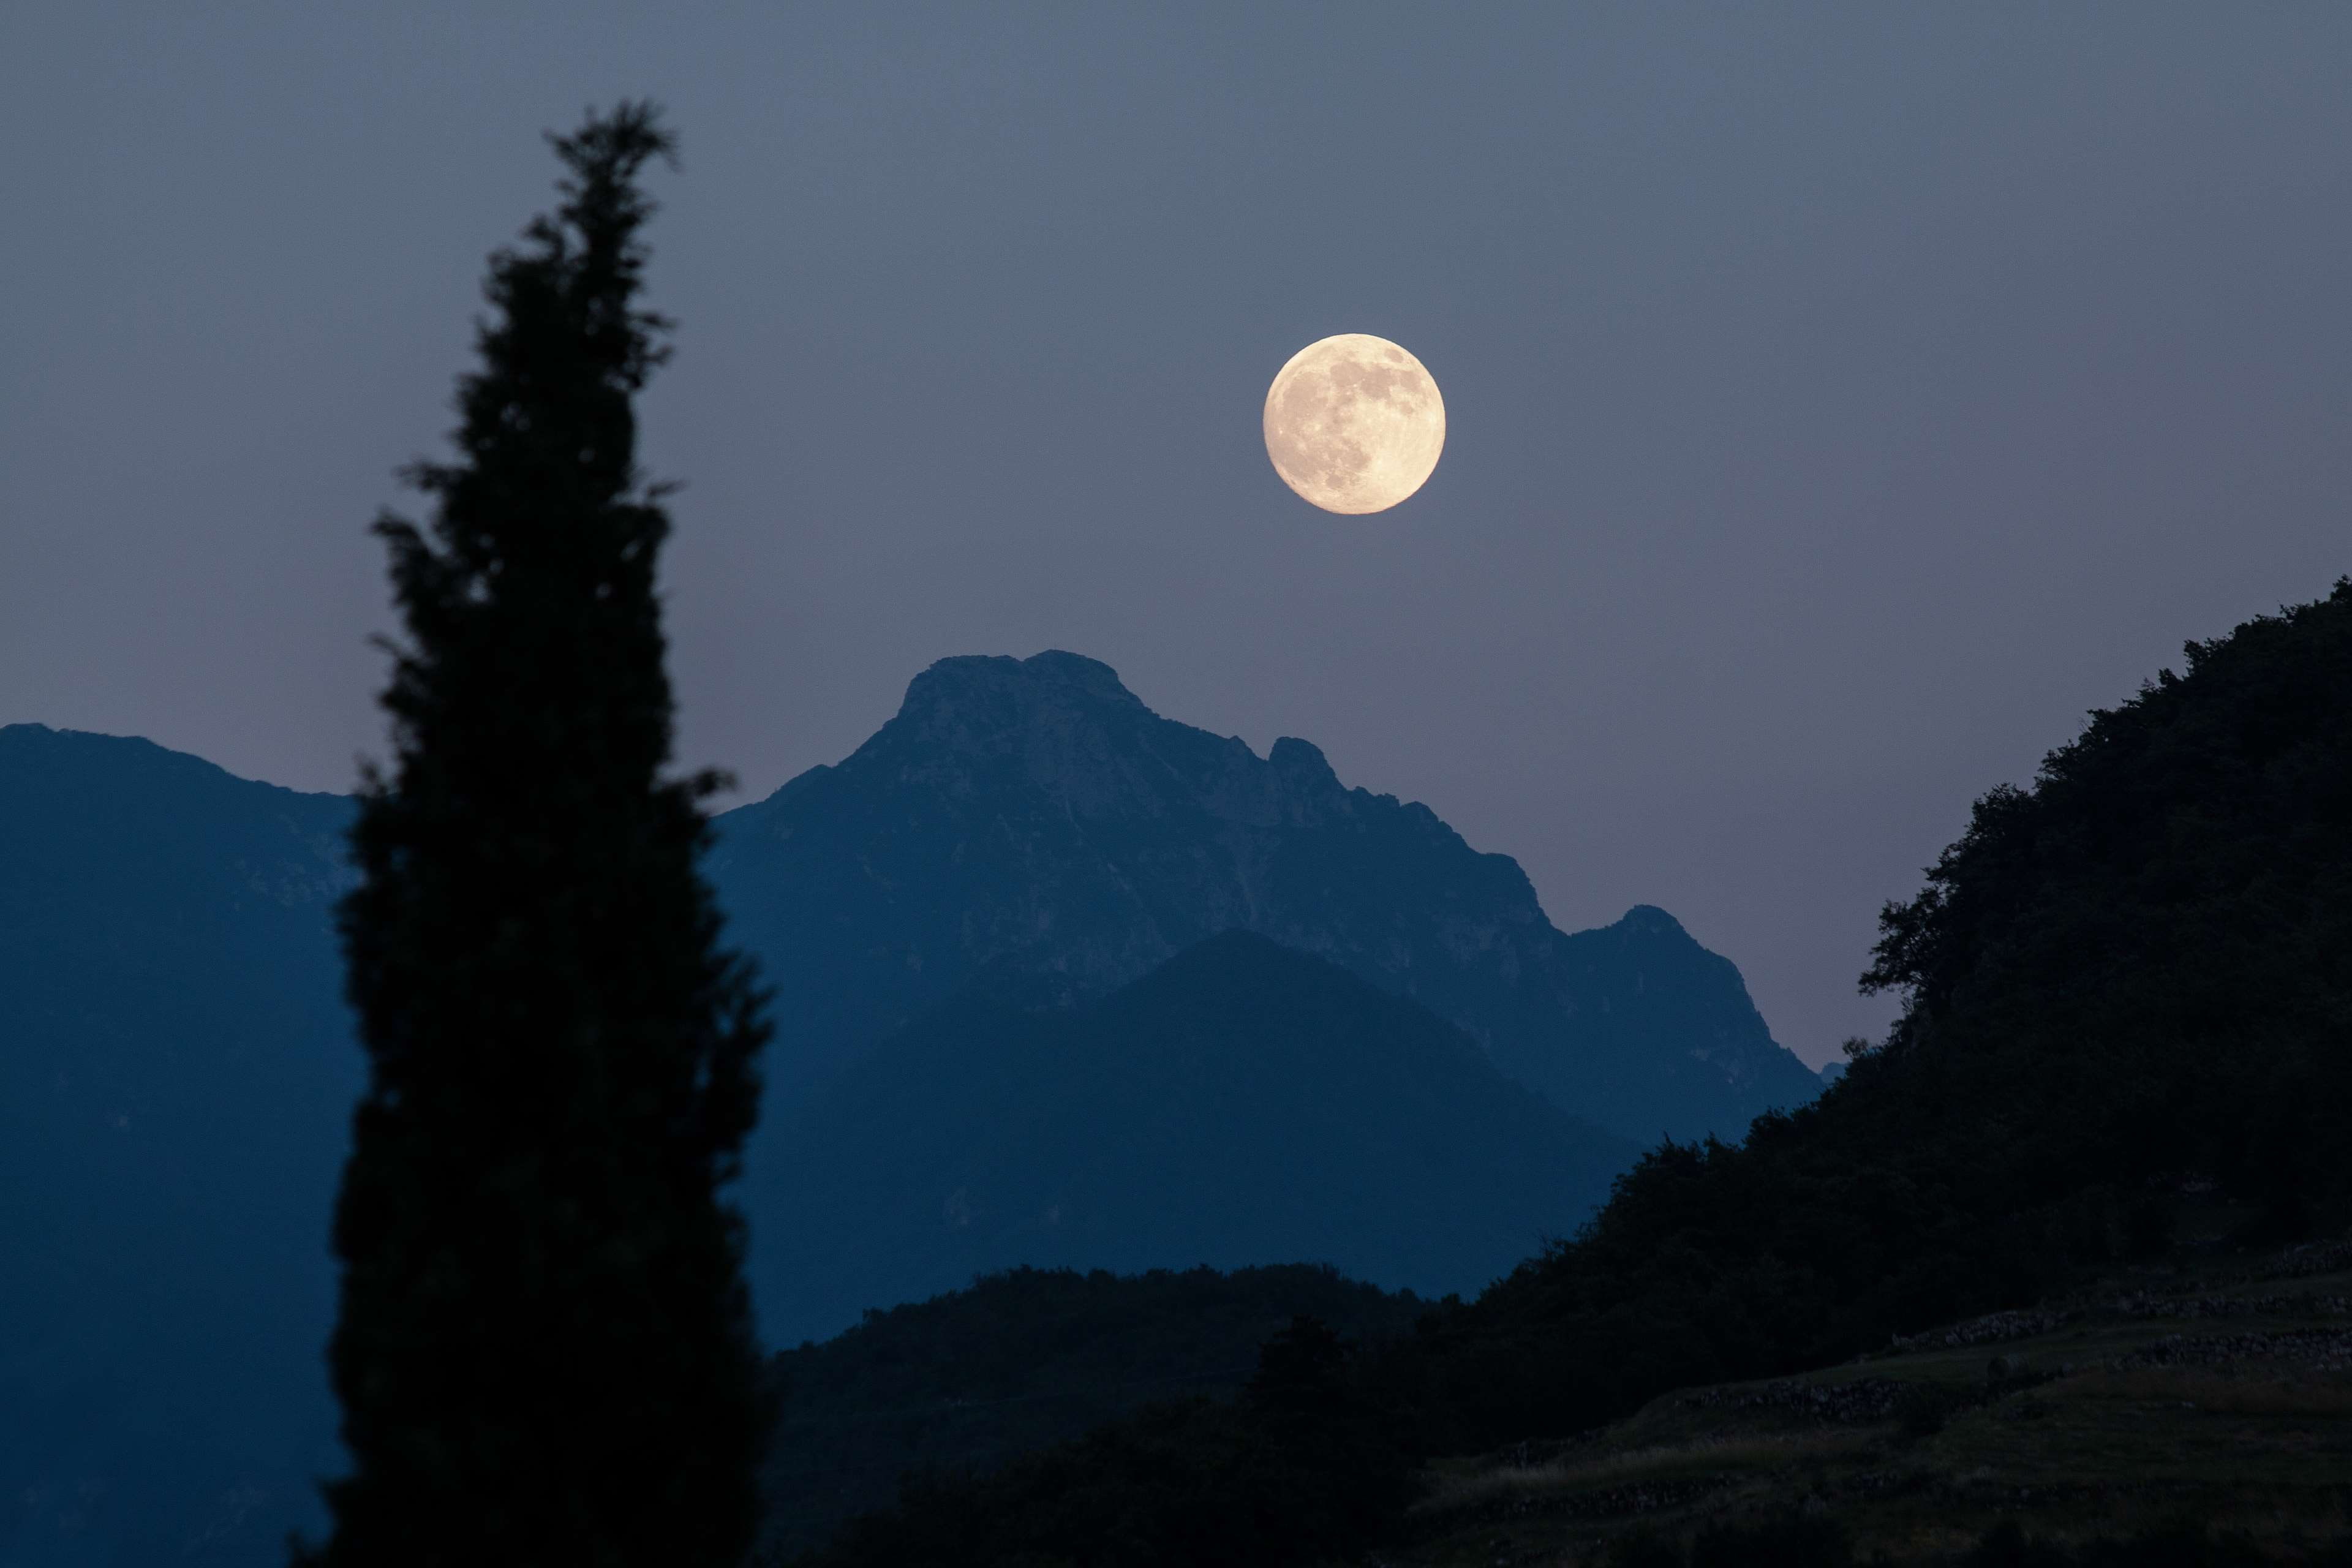 almost night, cypress, evening, full moon, moonrise, mountains